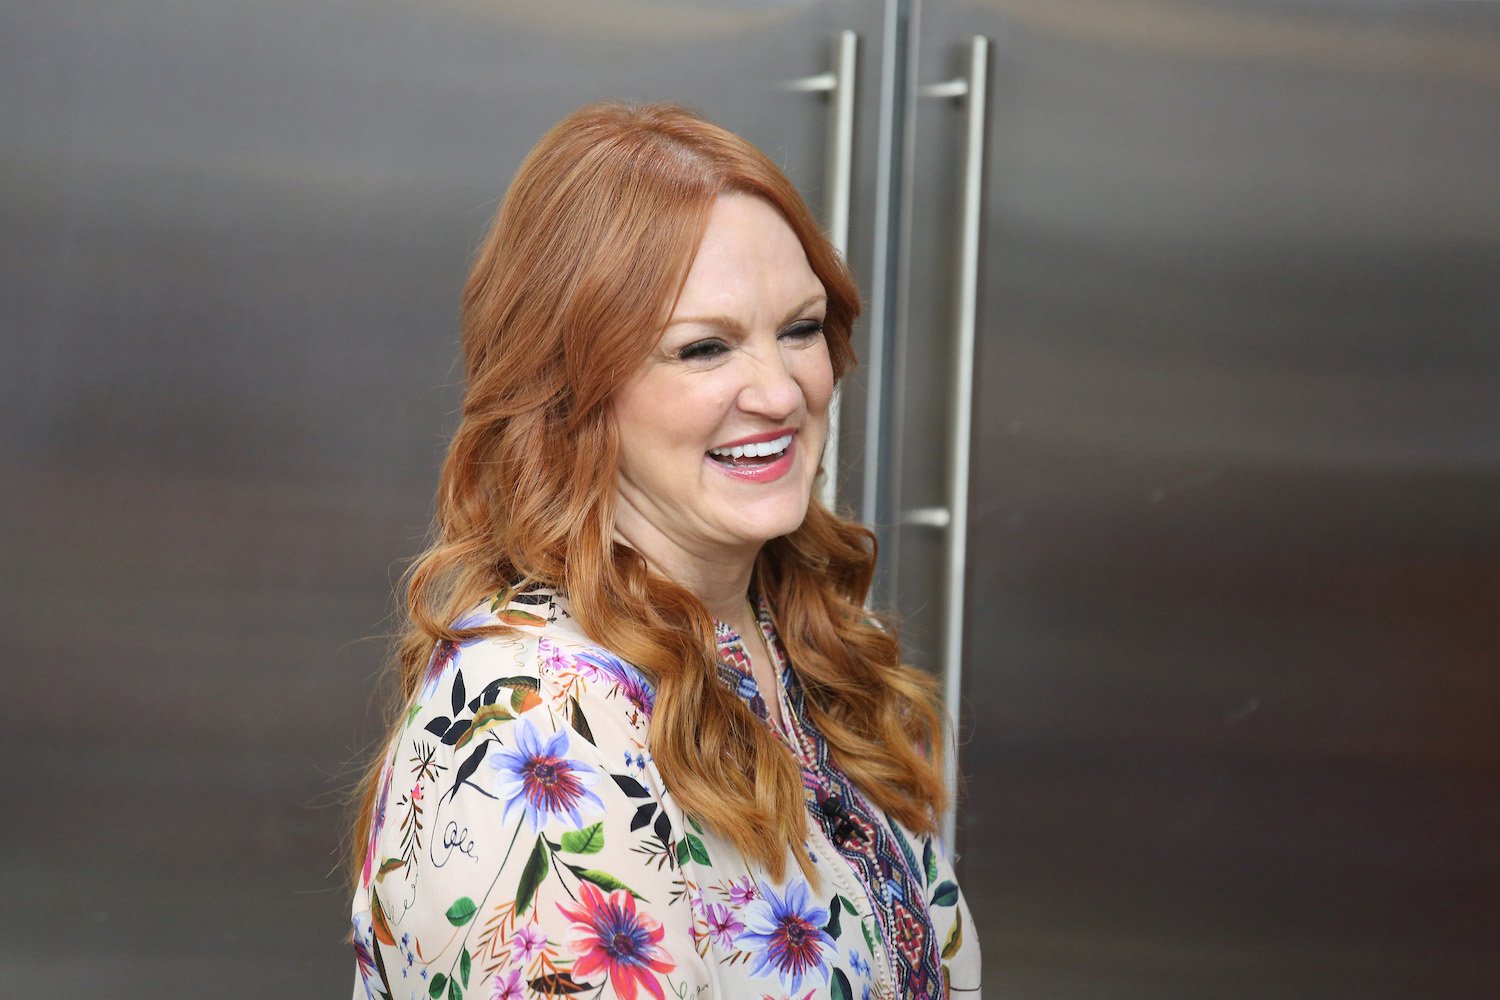 Ree Drummond Addresses ‘Lack of Professionalism and Decorum’ on ‘The Pioneer Woman’ But Her Fans Love It